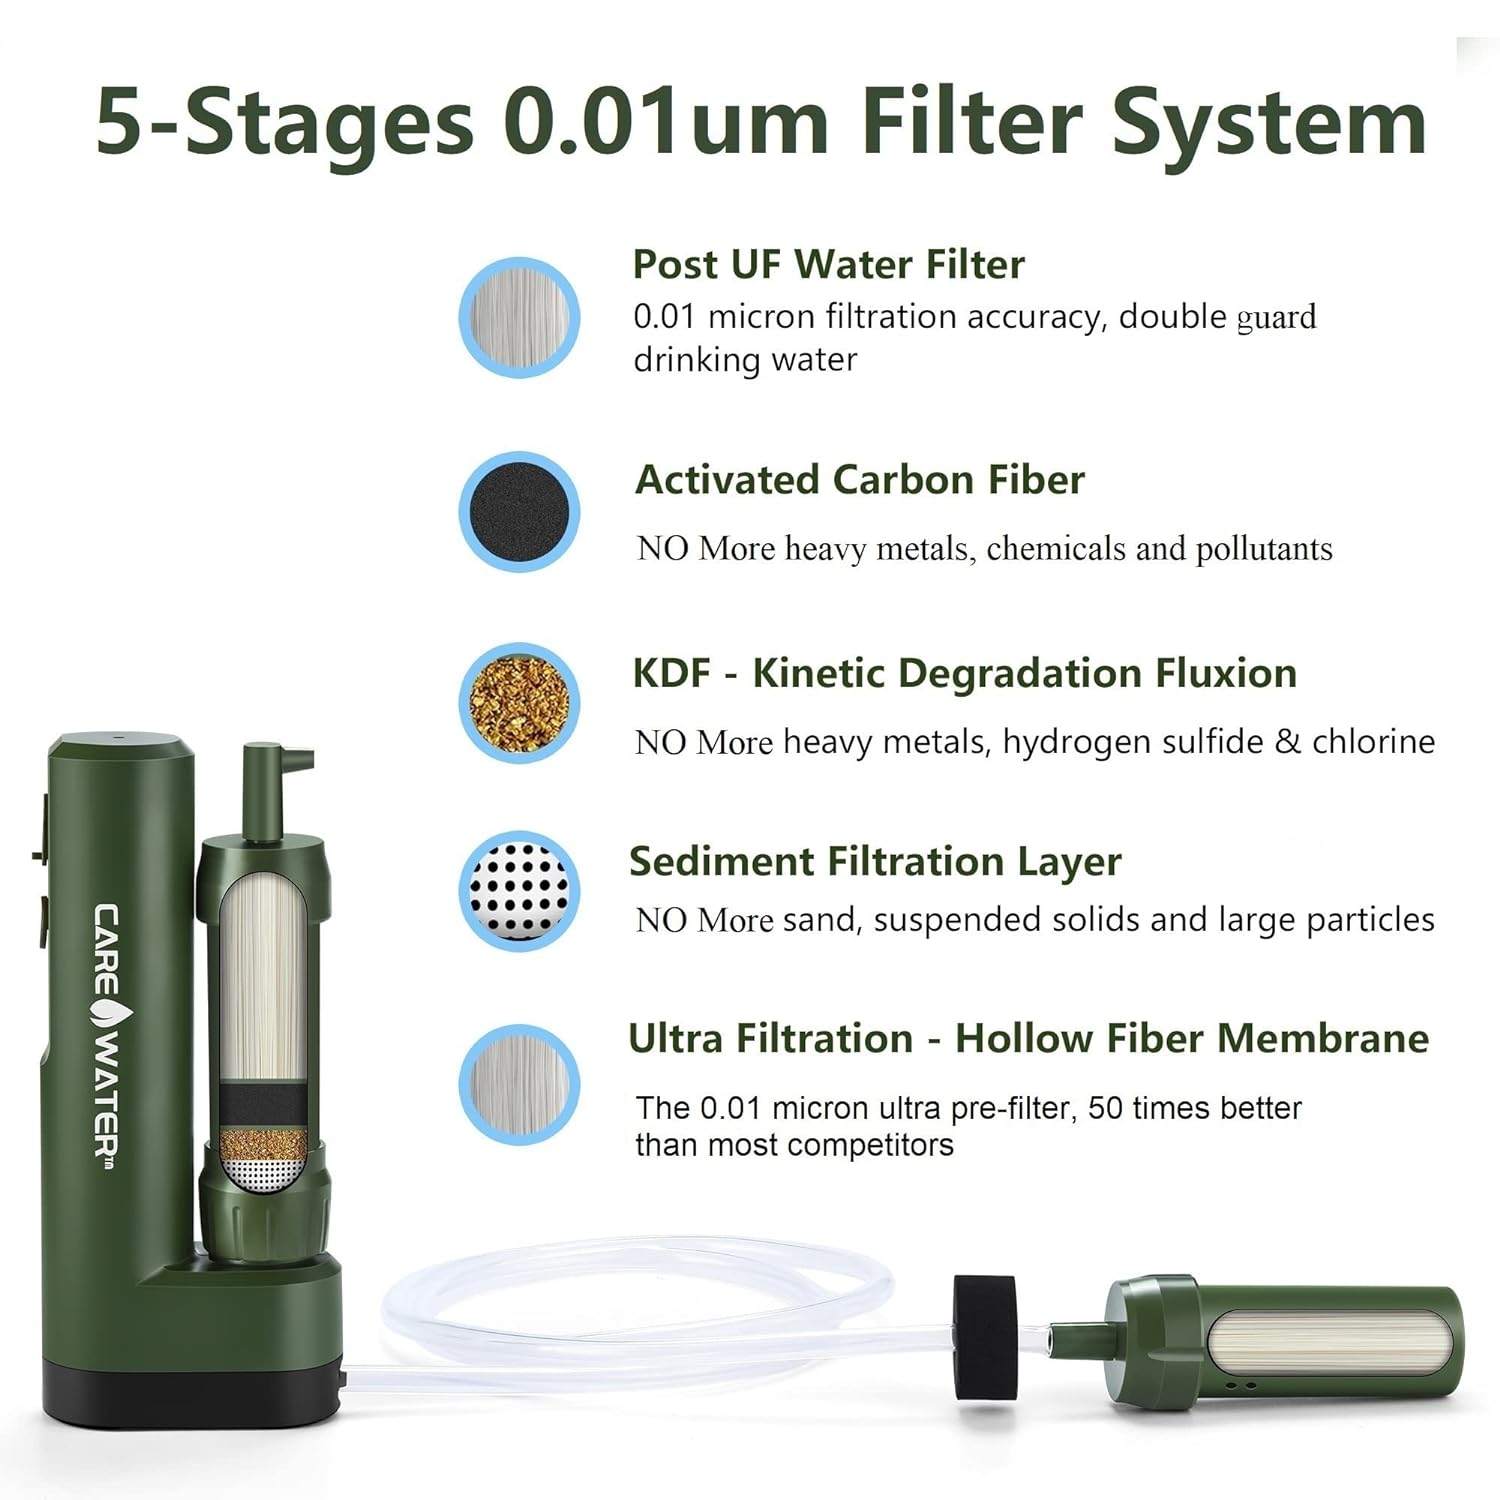 CaredWater Electric Portable Water Filter Purifier Survival for Camping Backpacking Hiking Travel, Water Filtration System Survival Gear with Backup Option and Emergency Phone Charger Namiedstore